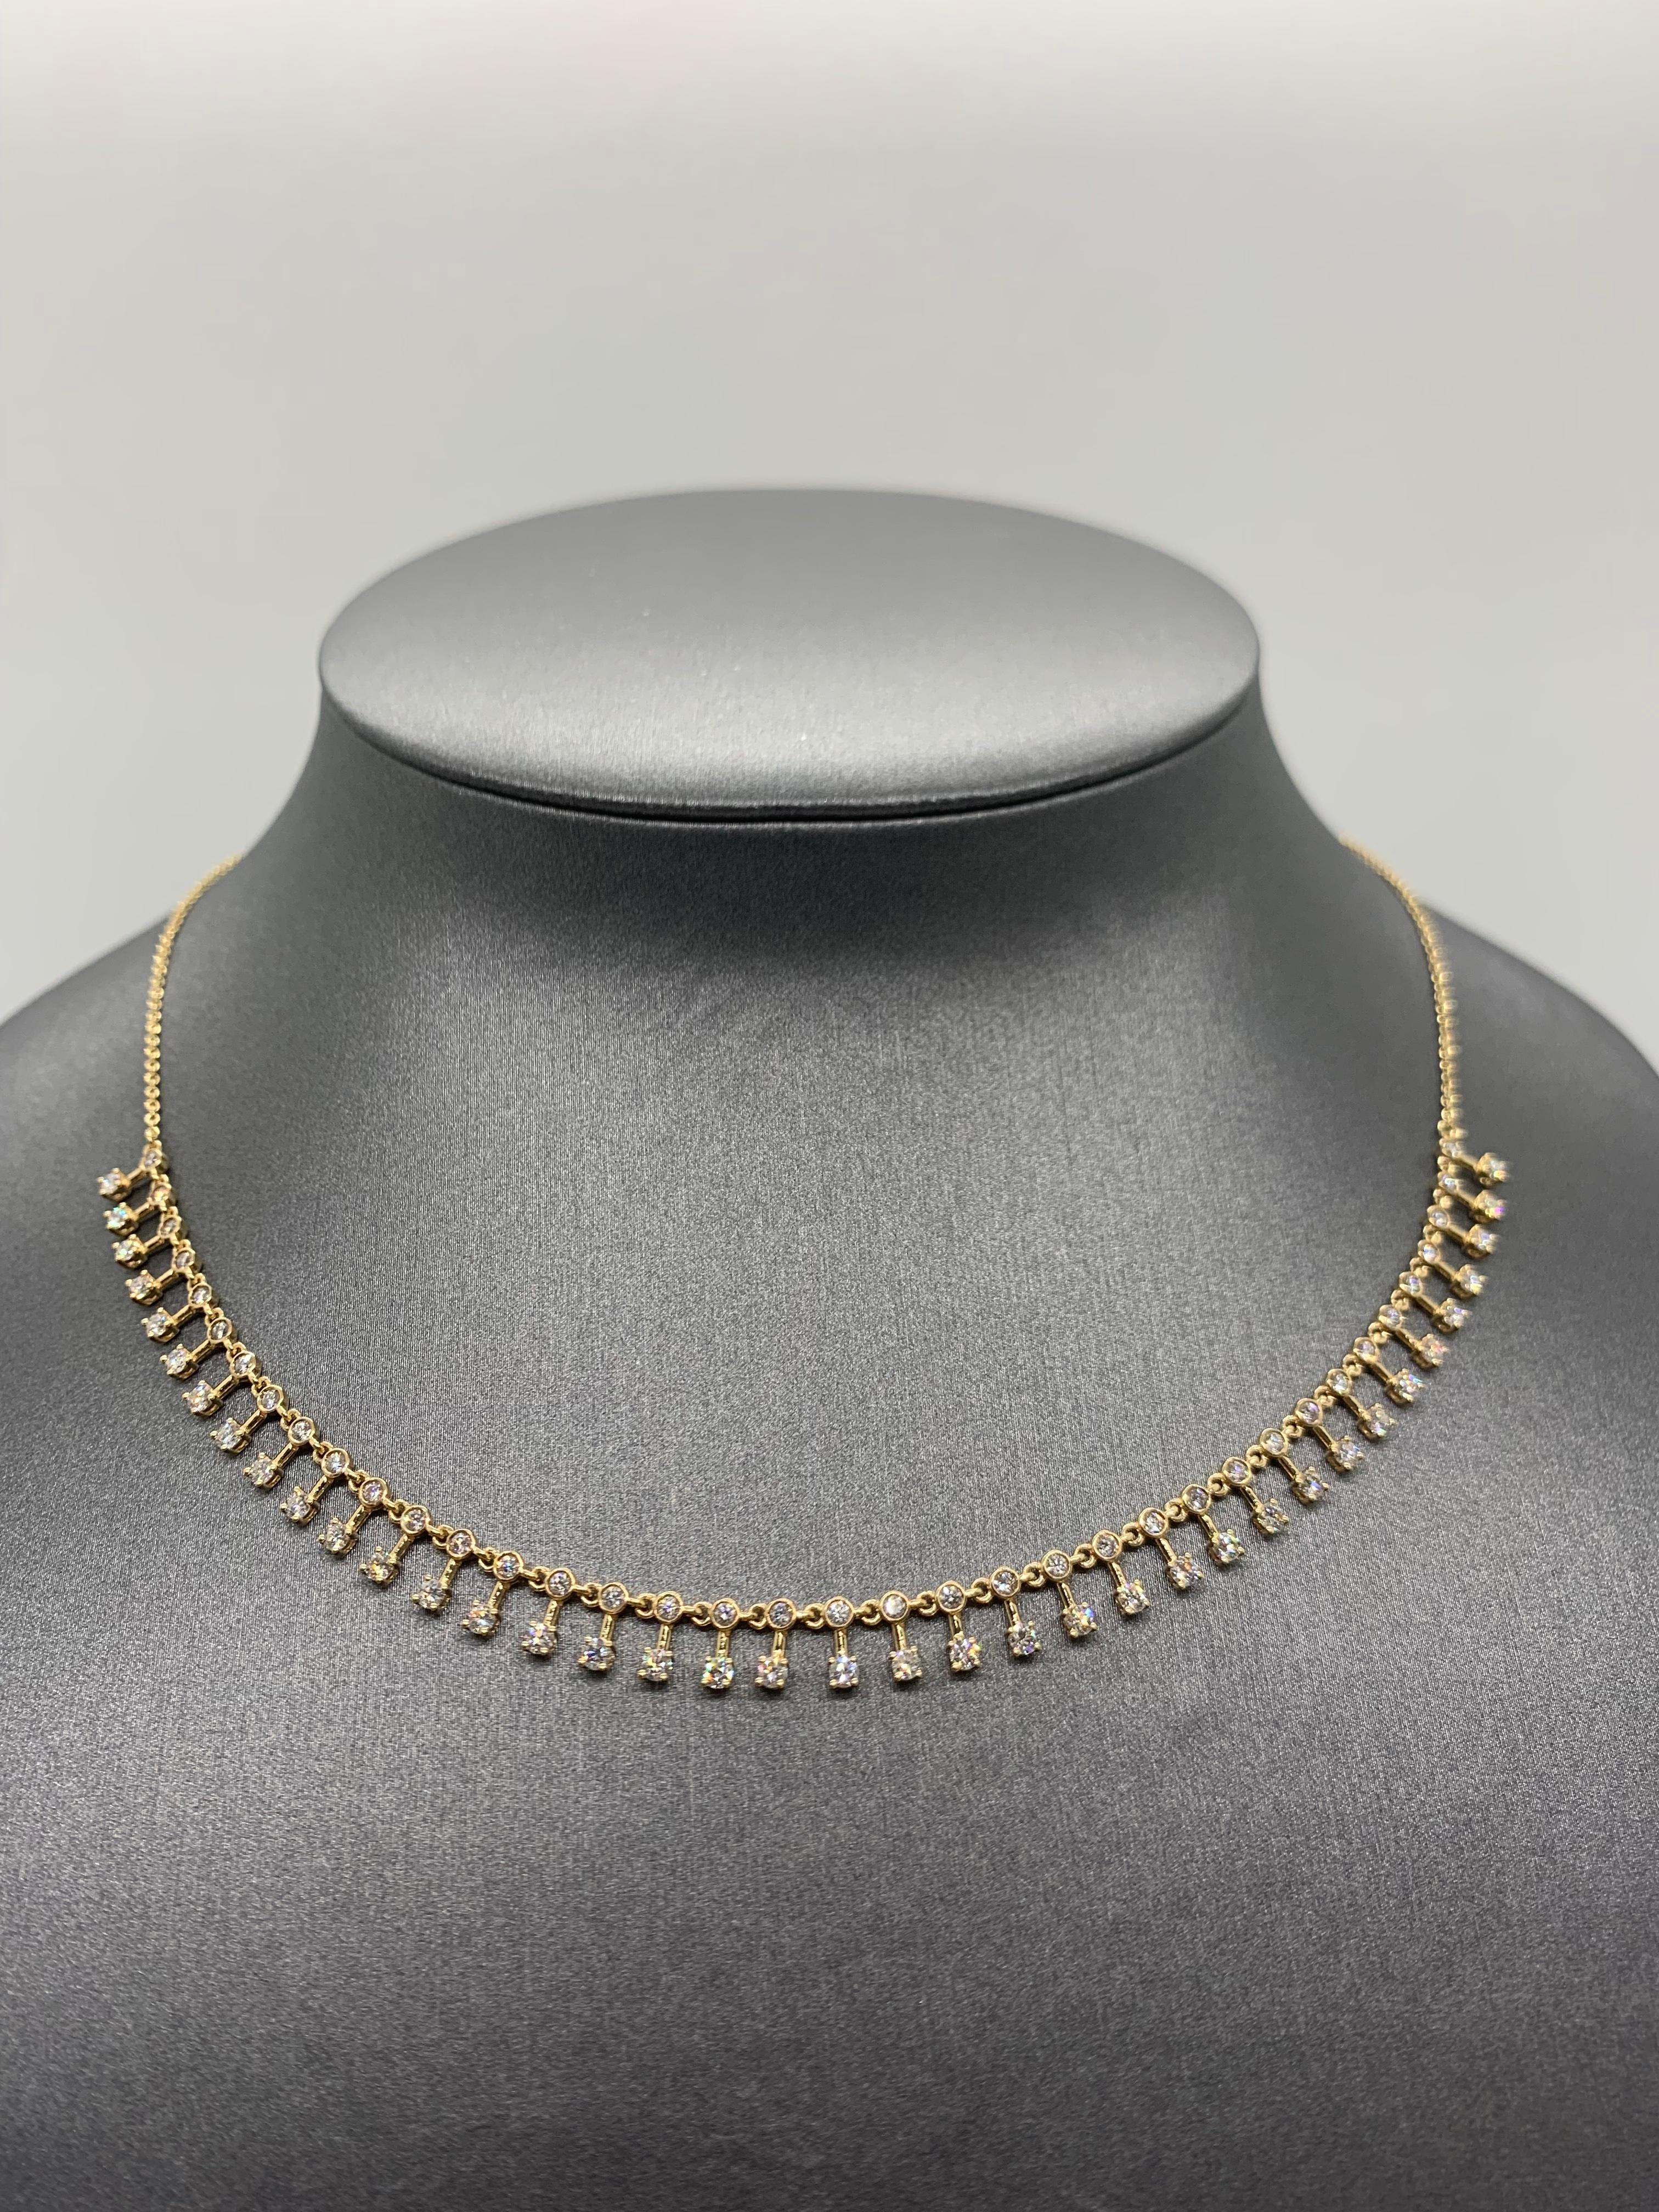 Round Cut Patterned Diamond Necklace in 18K Yellow Gold For Sale